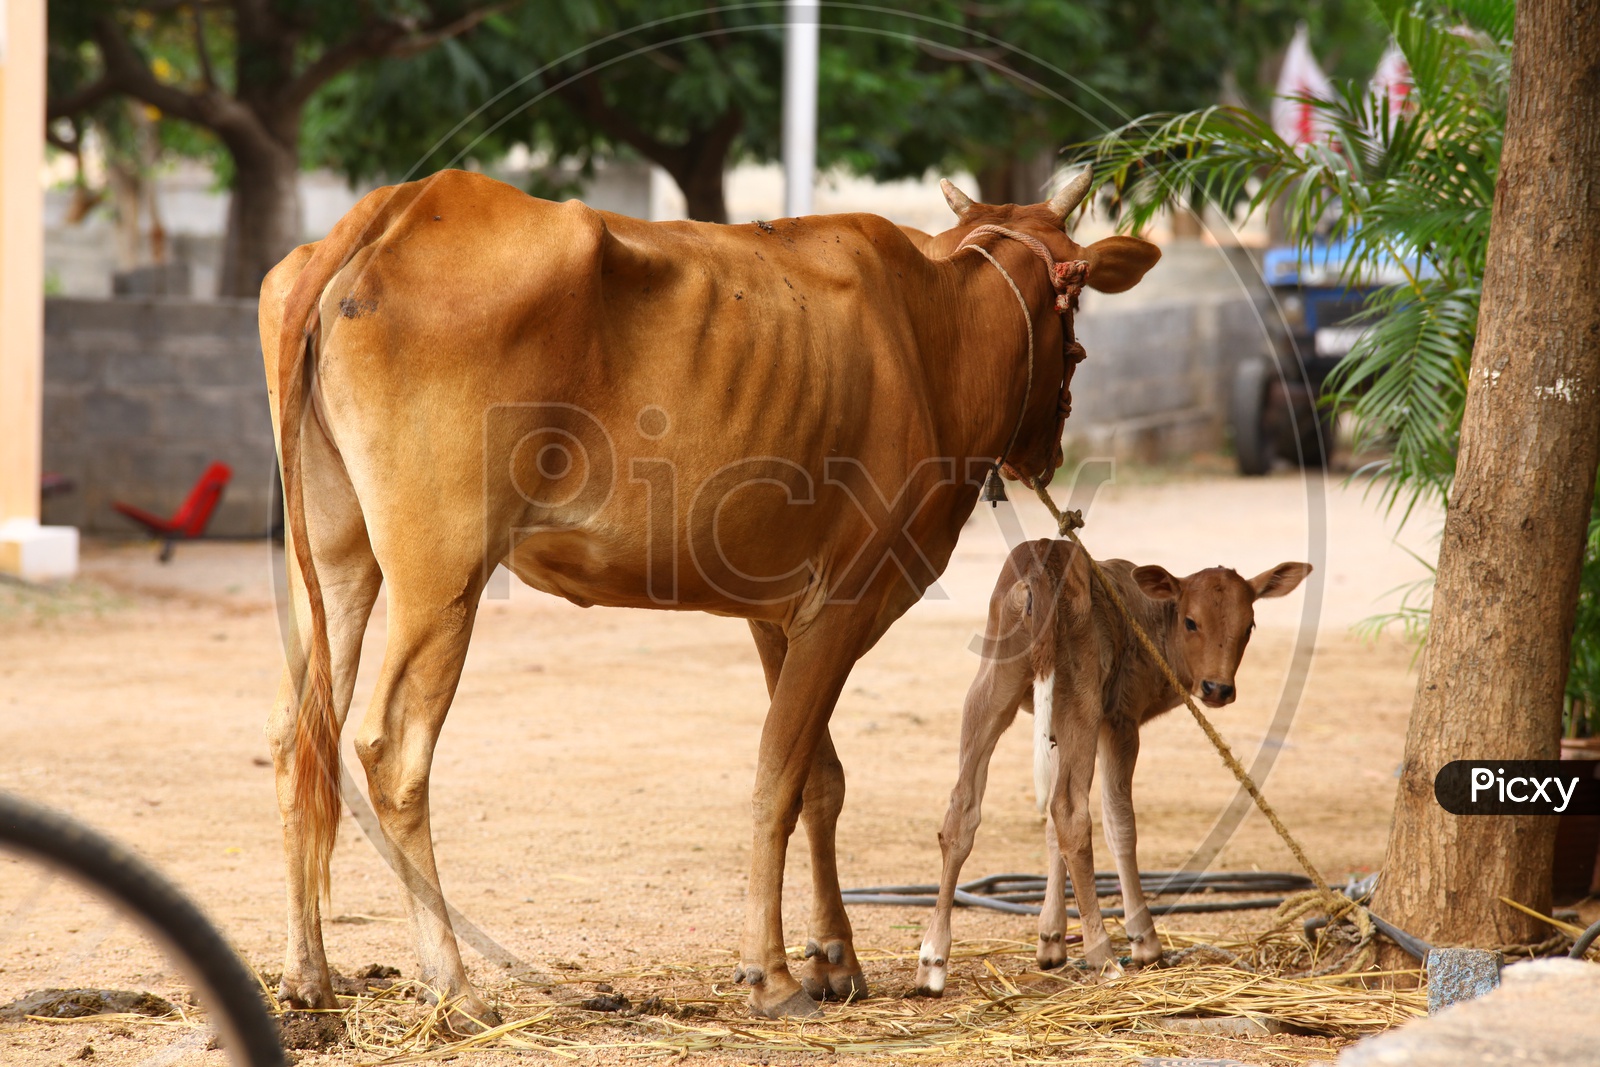 Cow tied up to the tree and calf beside it